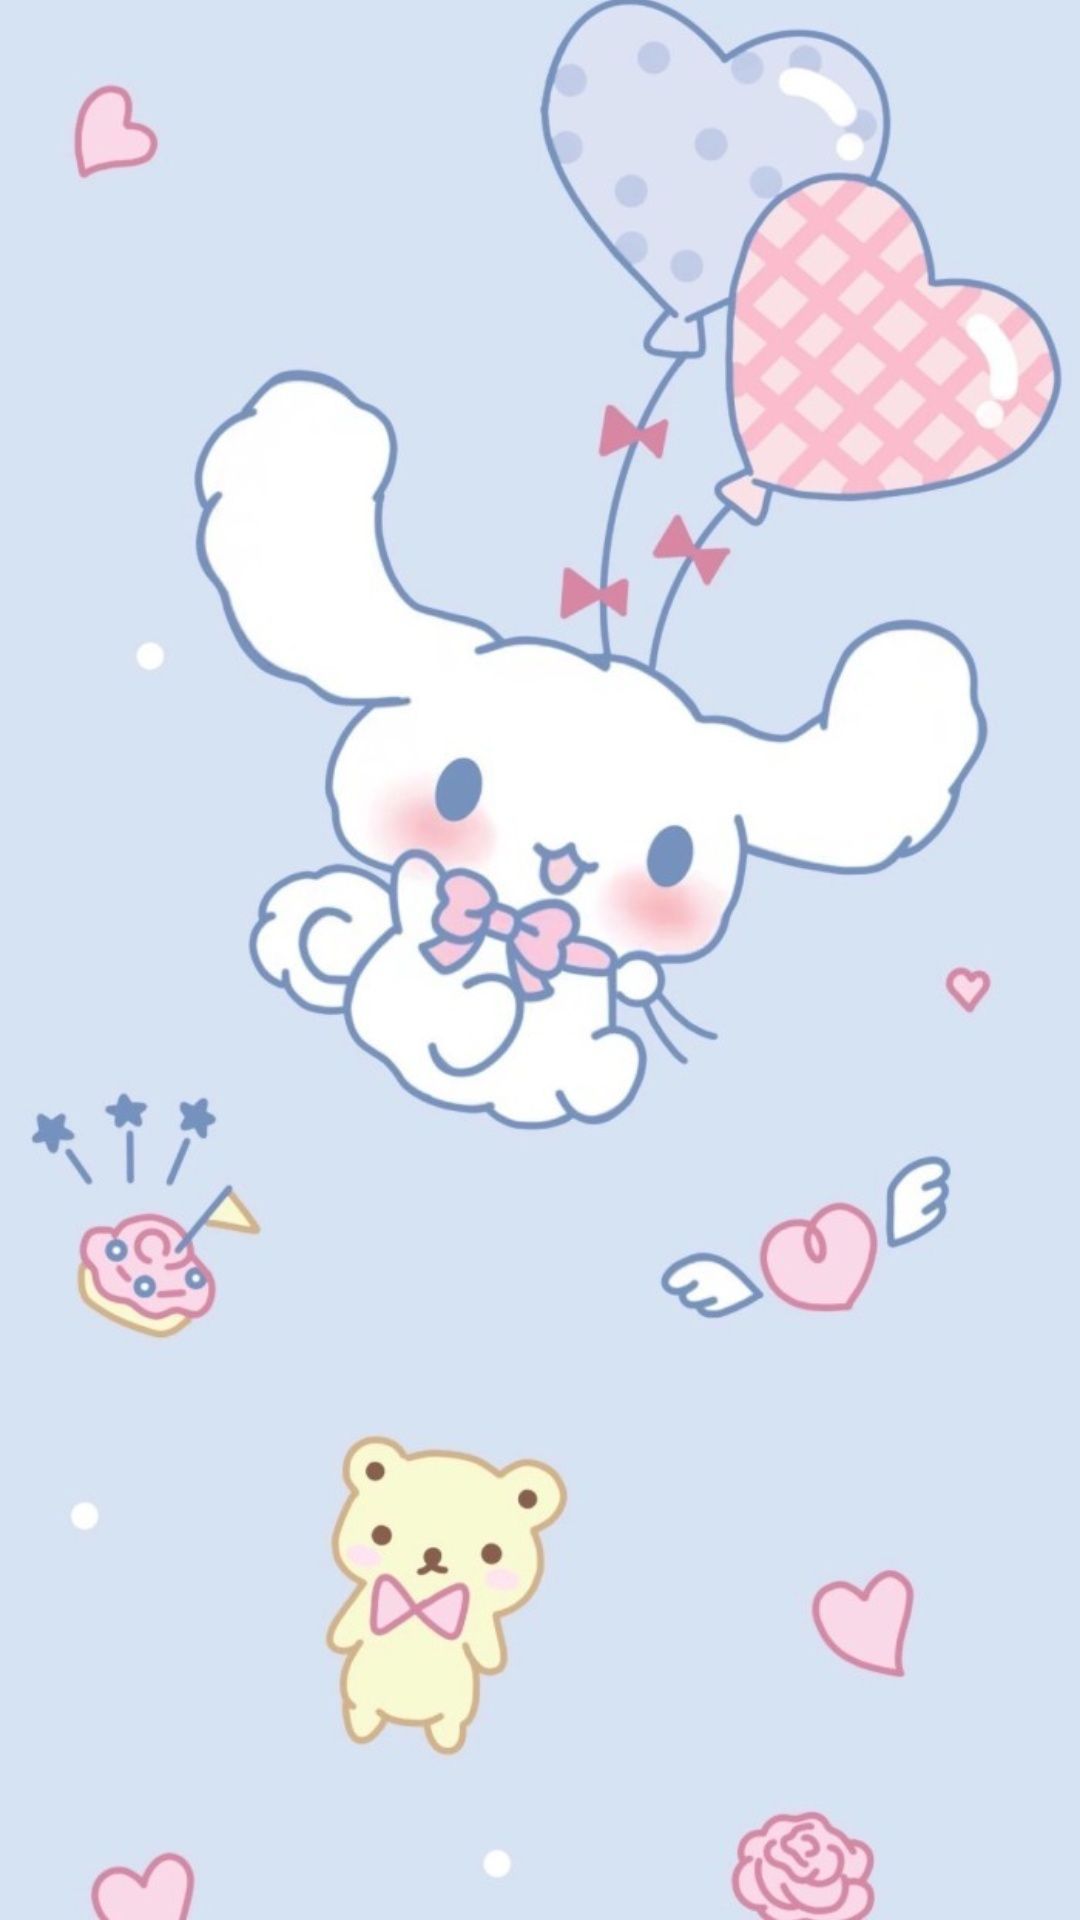 Cute Cinnamoroll Wallpaper for iPhone with high-resolution 1080x1920 pixel. You can use this wallpaper for your iPhone 5, 6, 7, 8, X, XS, XR backgrounds, Mobile Screensaver, or iPad Lock Screen - Cinnamoroll